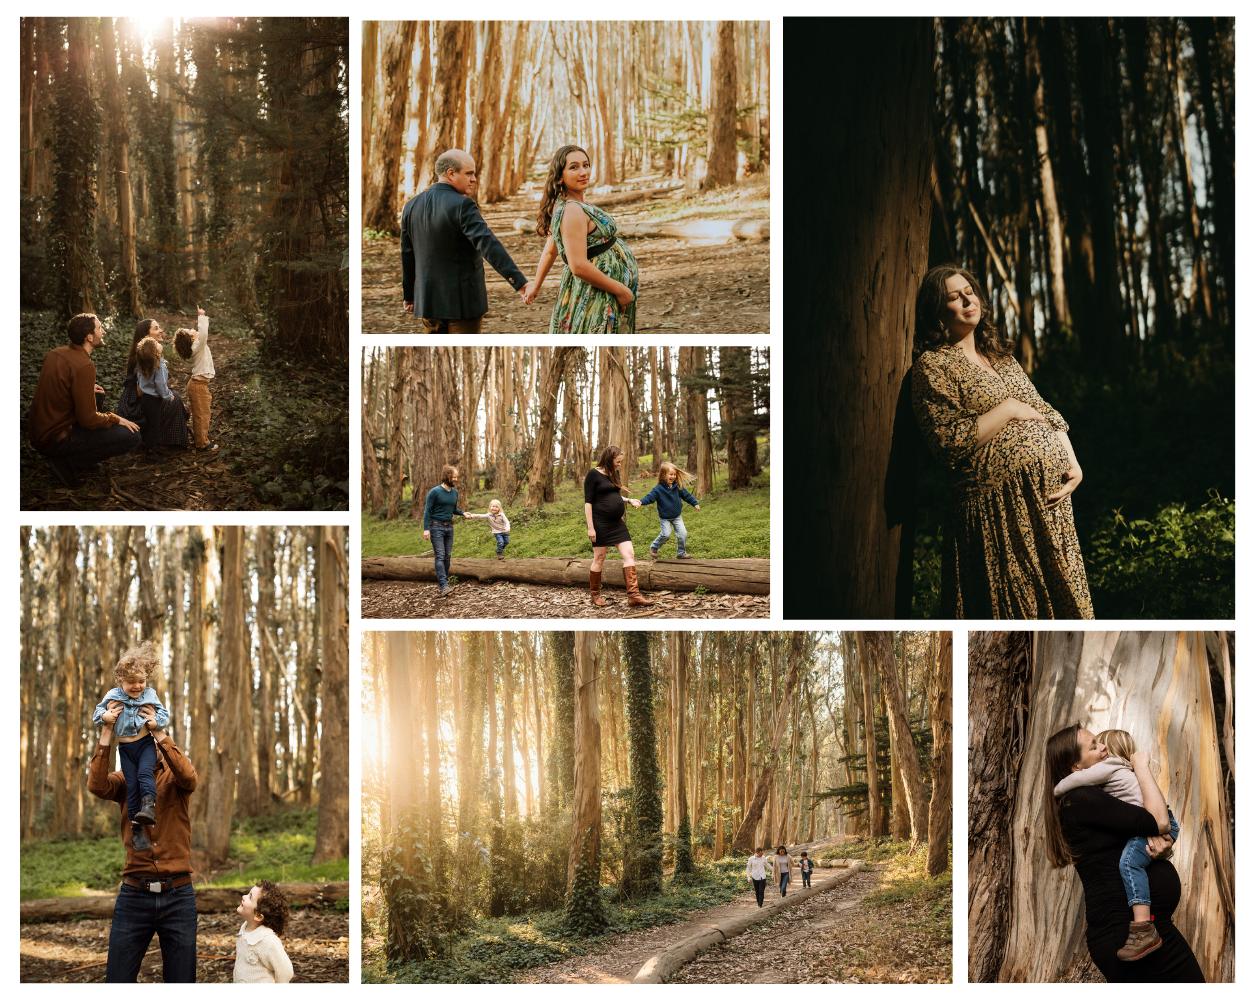 Collage of family and maternity photography sessions at Woodline Lovers Lane in the Presidio of SF